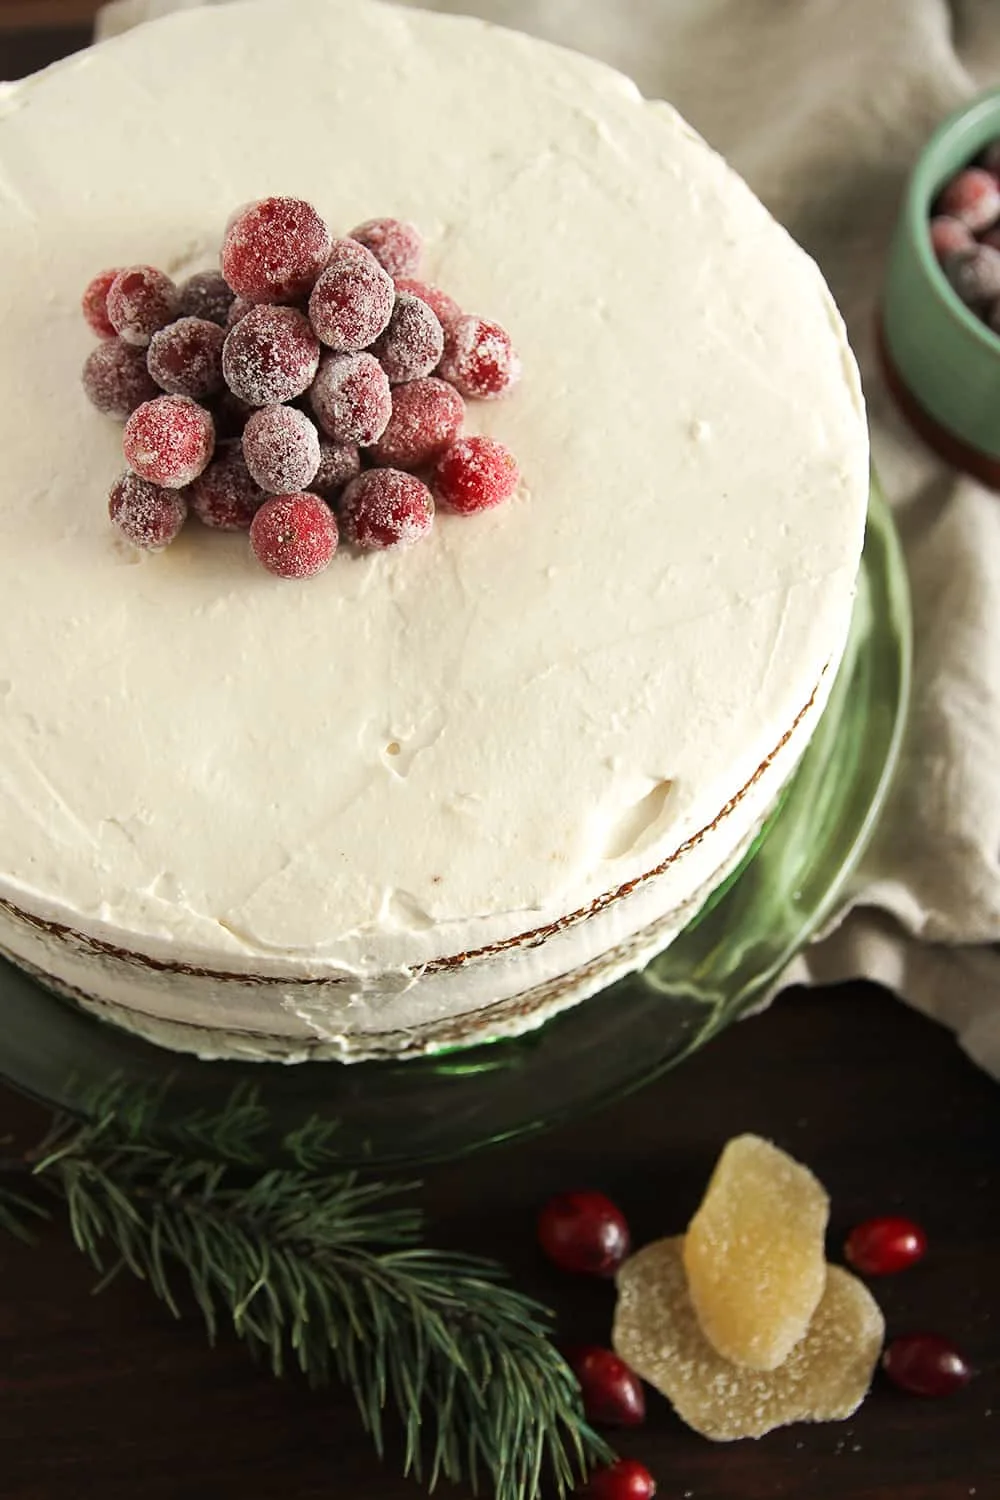 Sugared Cranberries are the perfect adornment to Gingerbread Layer Cake